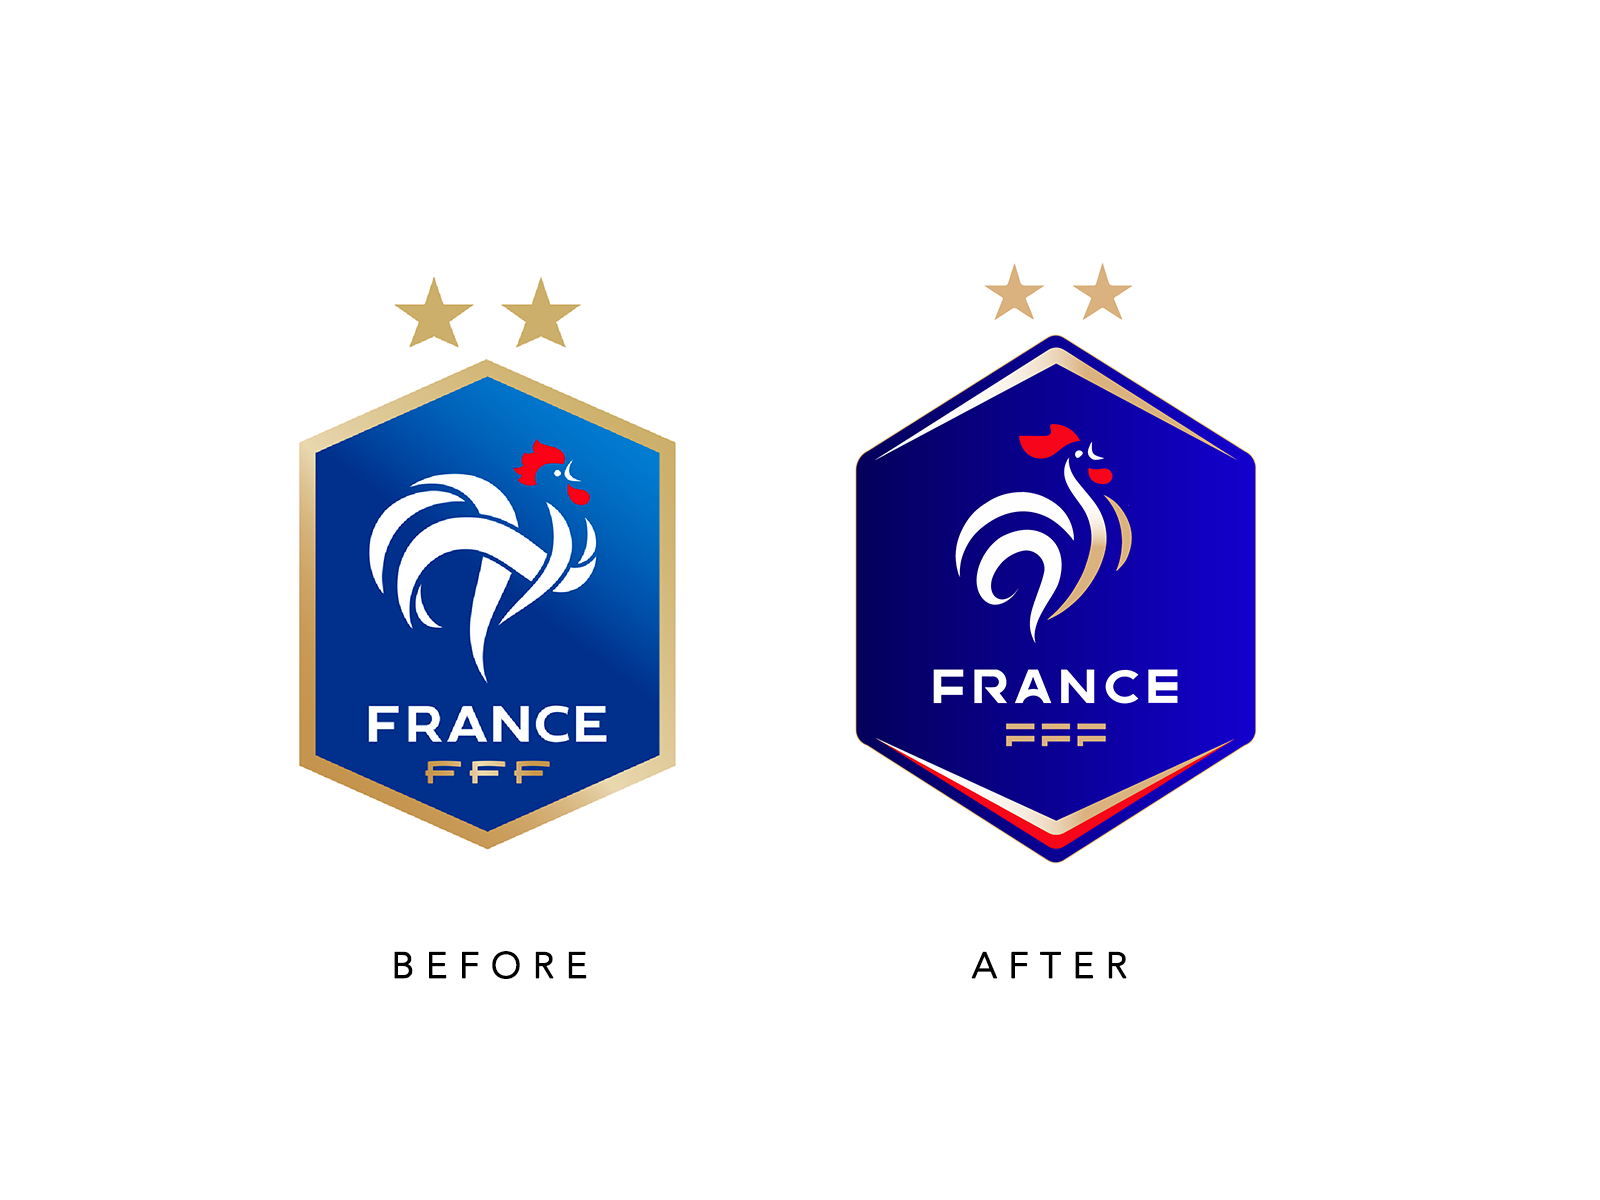 French Football Federation & France National Football Team Logo [fff.fr]  image | Football team logos, France national team, France national football  team